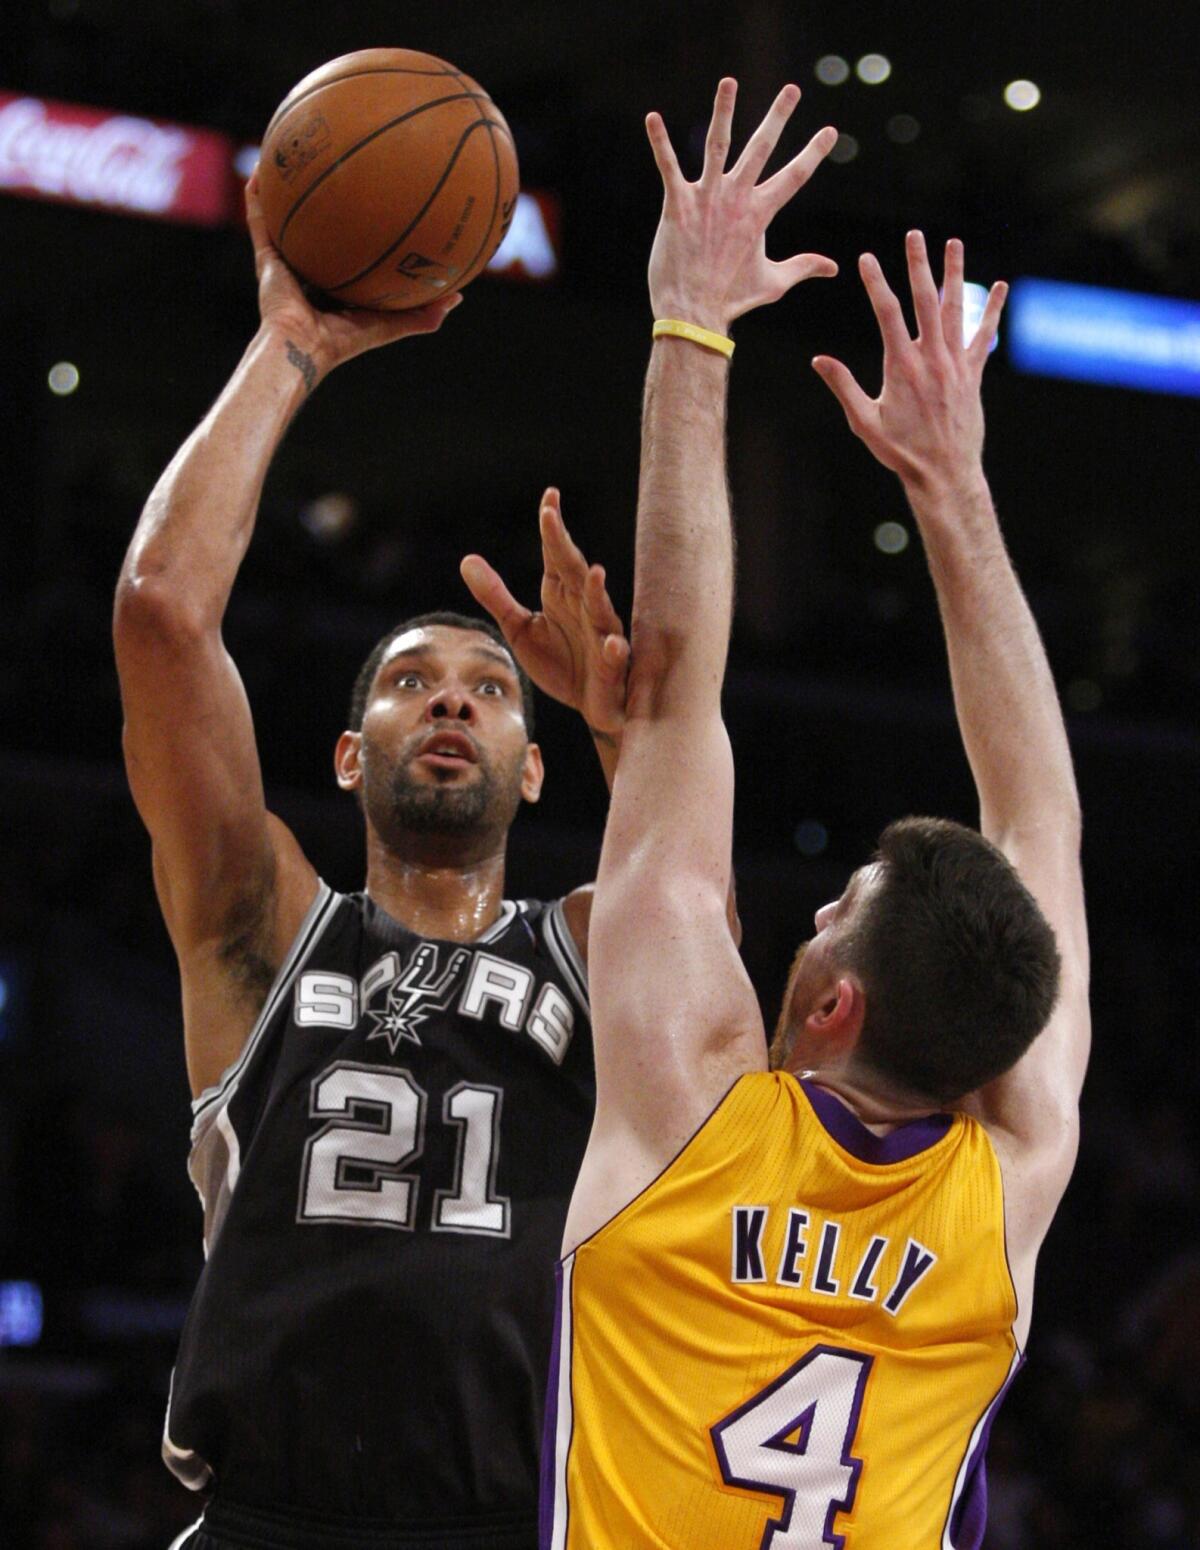 Lakers forward Ryan Kelly stands his ground as Spurs power forward Tim Duncan looks to shoot.